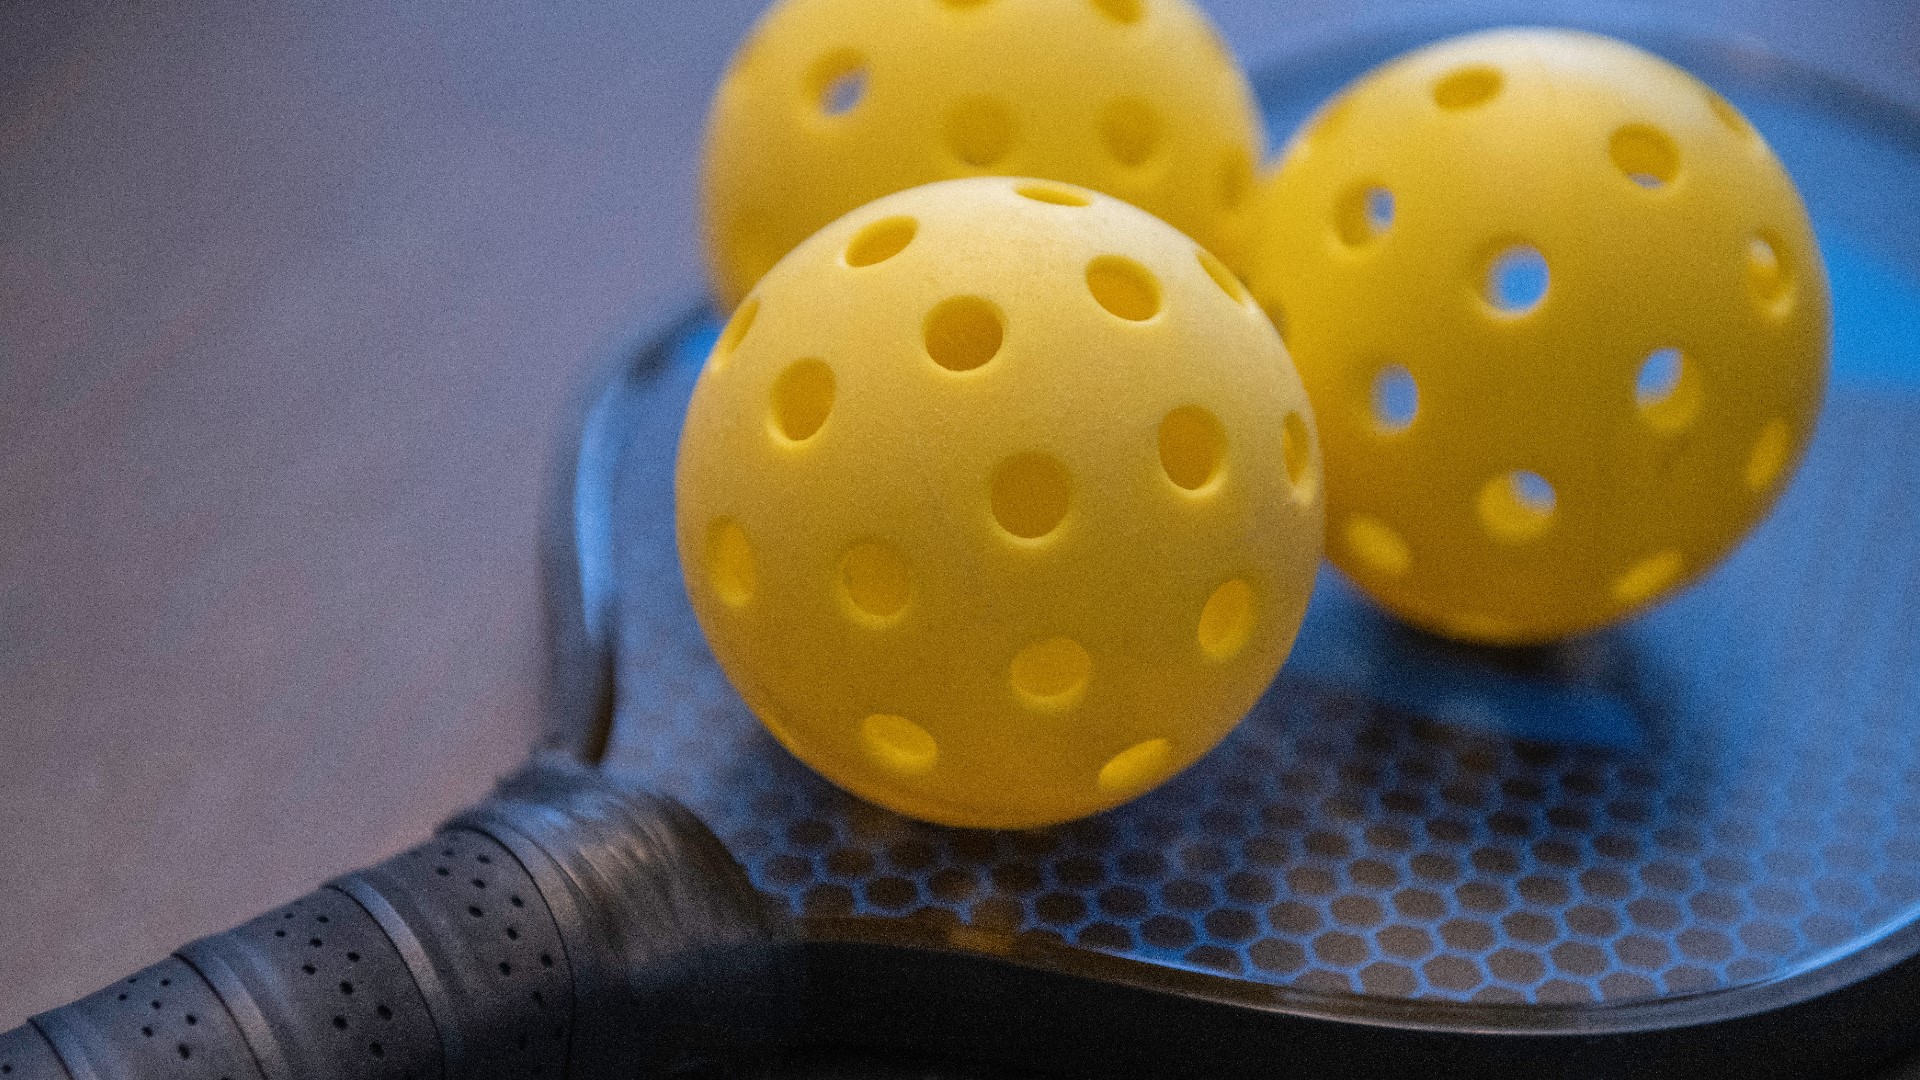 Pickleball emerged as a sport in the 1960s, but gained popularity in the last decade.